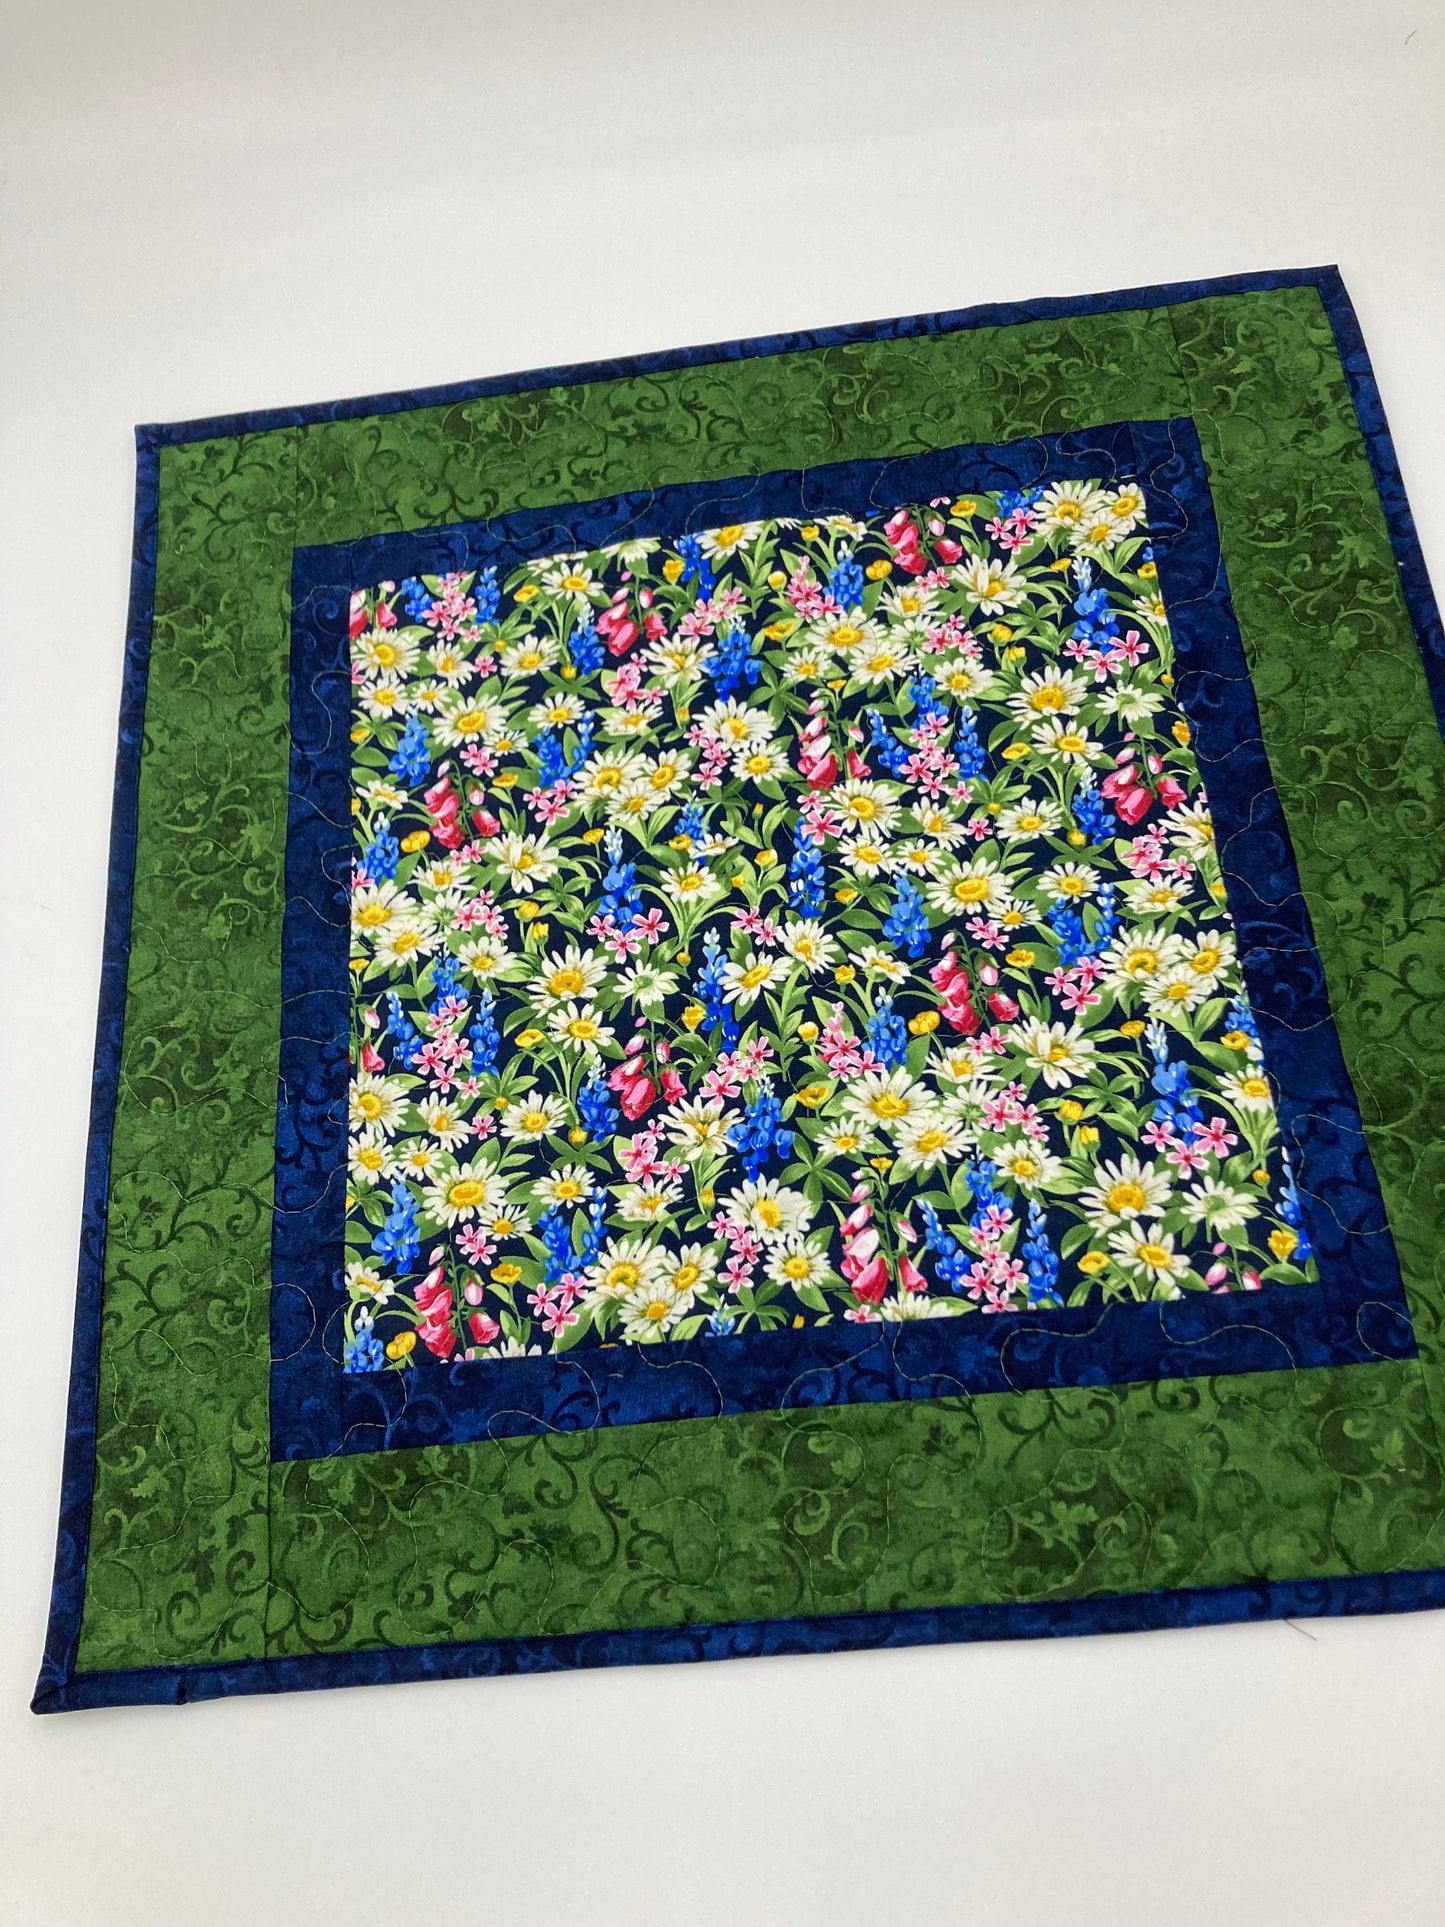 Garden Daisy Blue Bonnet Snapdragon Quilted Table Topper, Large Square Coffee Table Reversible 20x20" Summer End Table, Everyday Kitchen